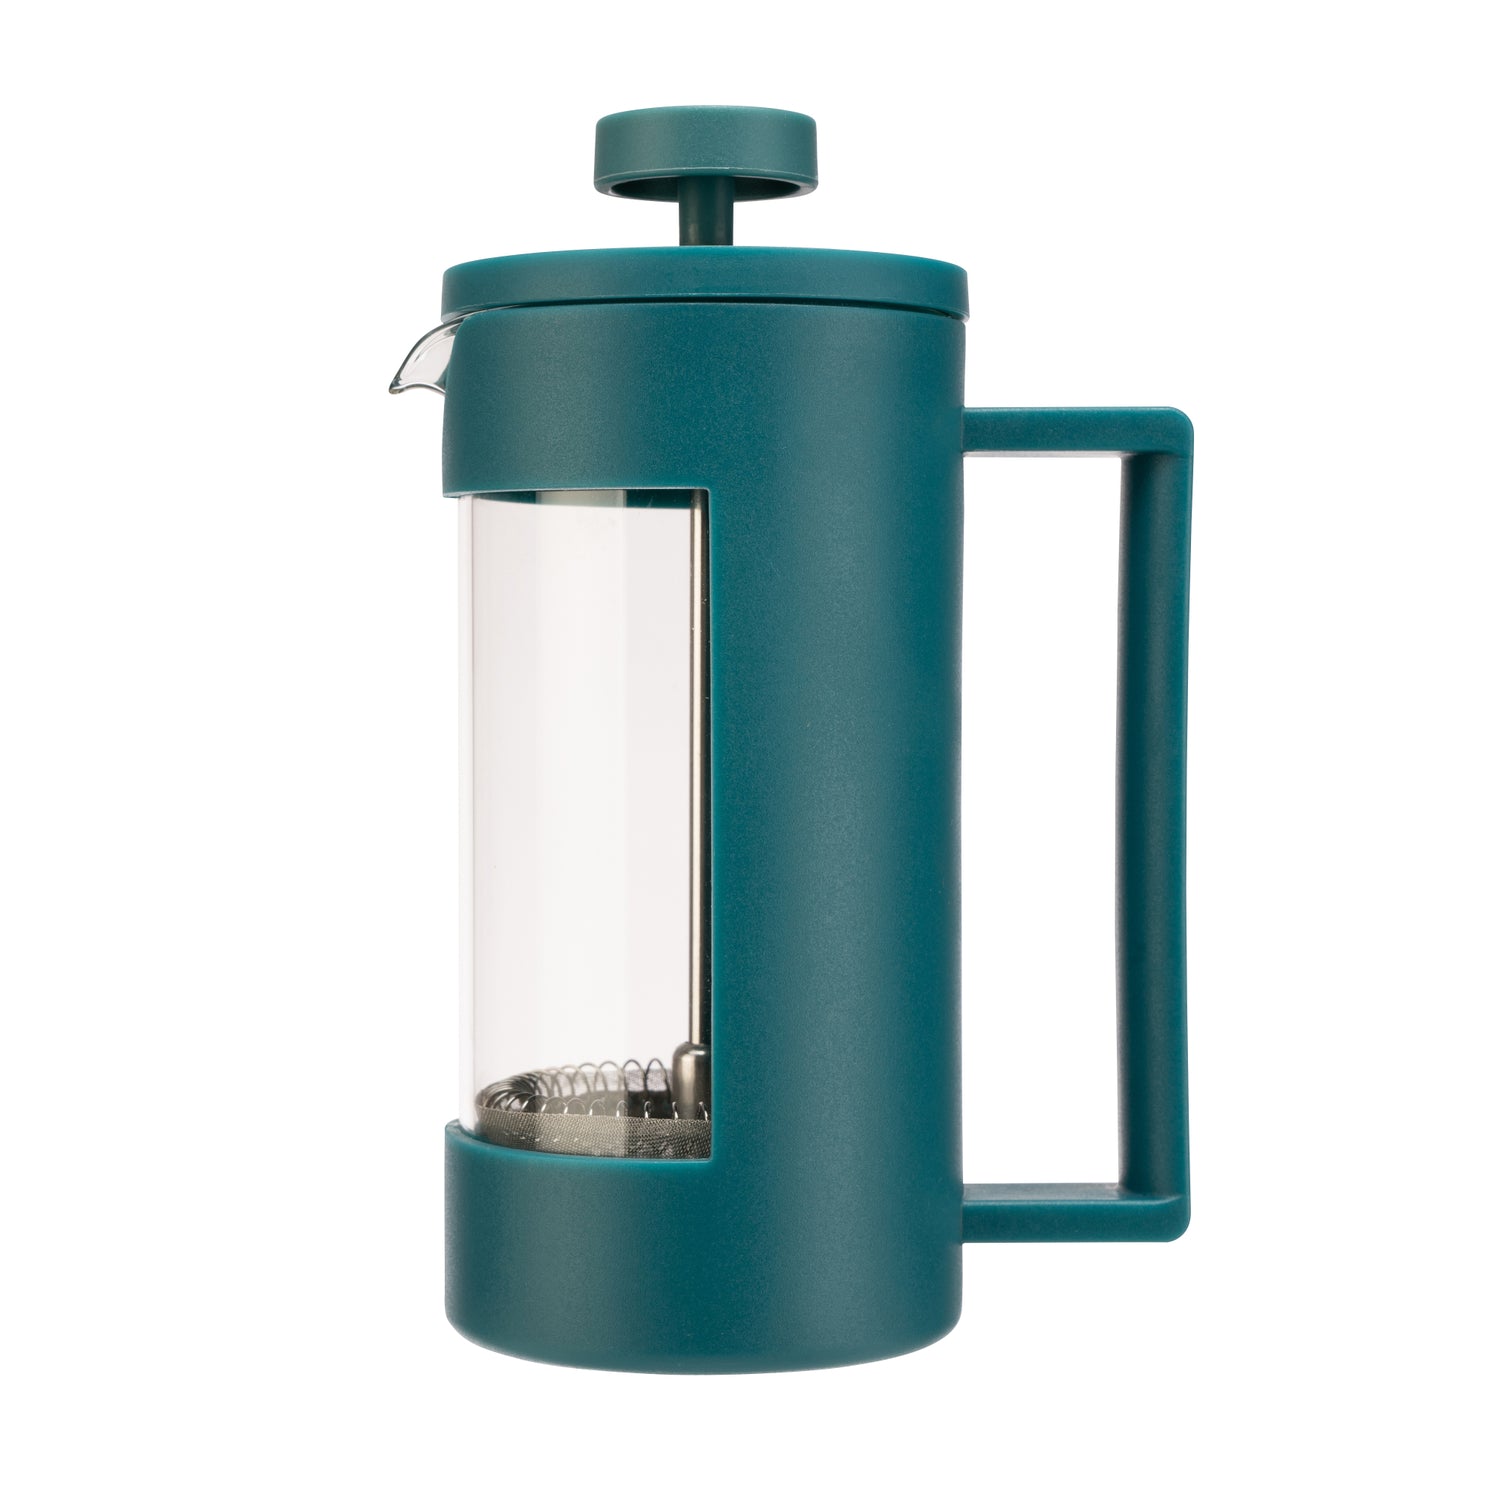 The Home Siip 3 Cup Cafetiere 3 Shaws Department Stores